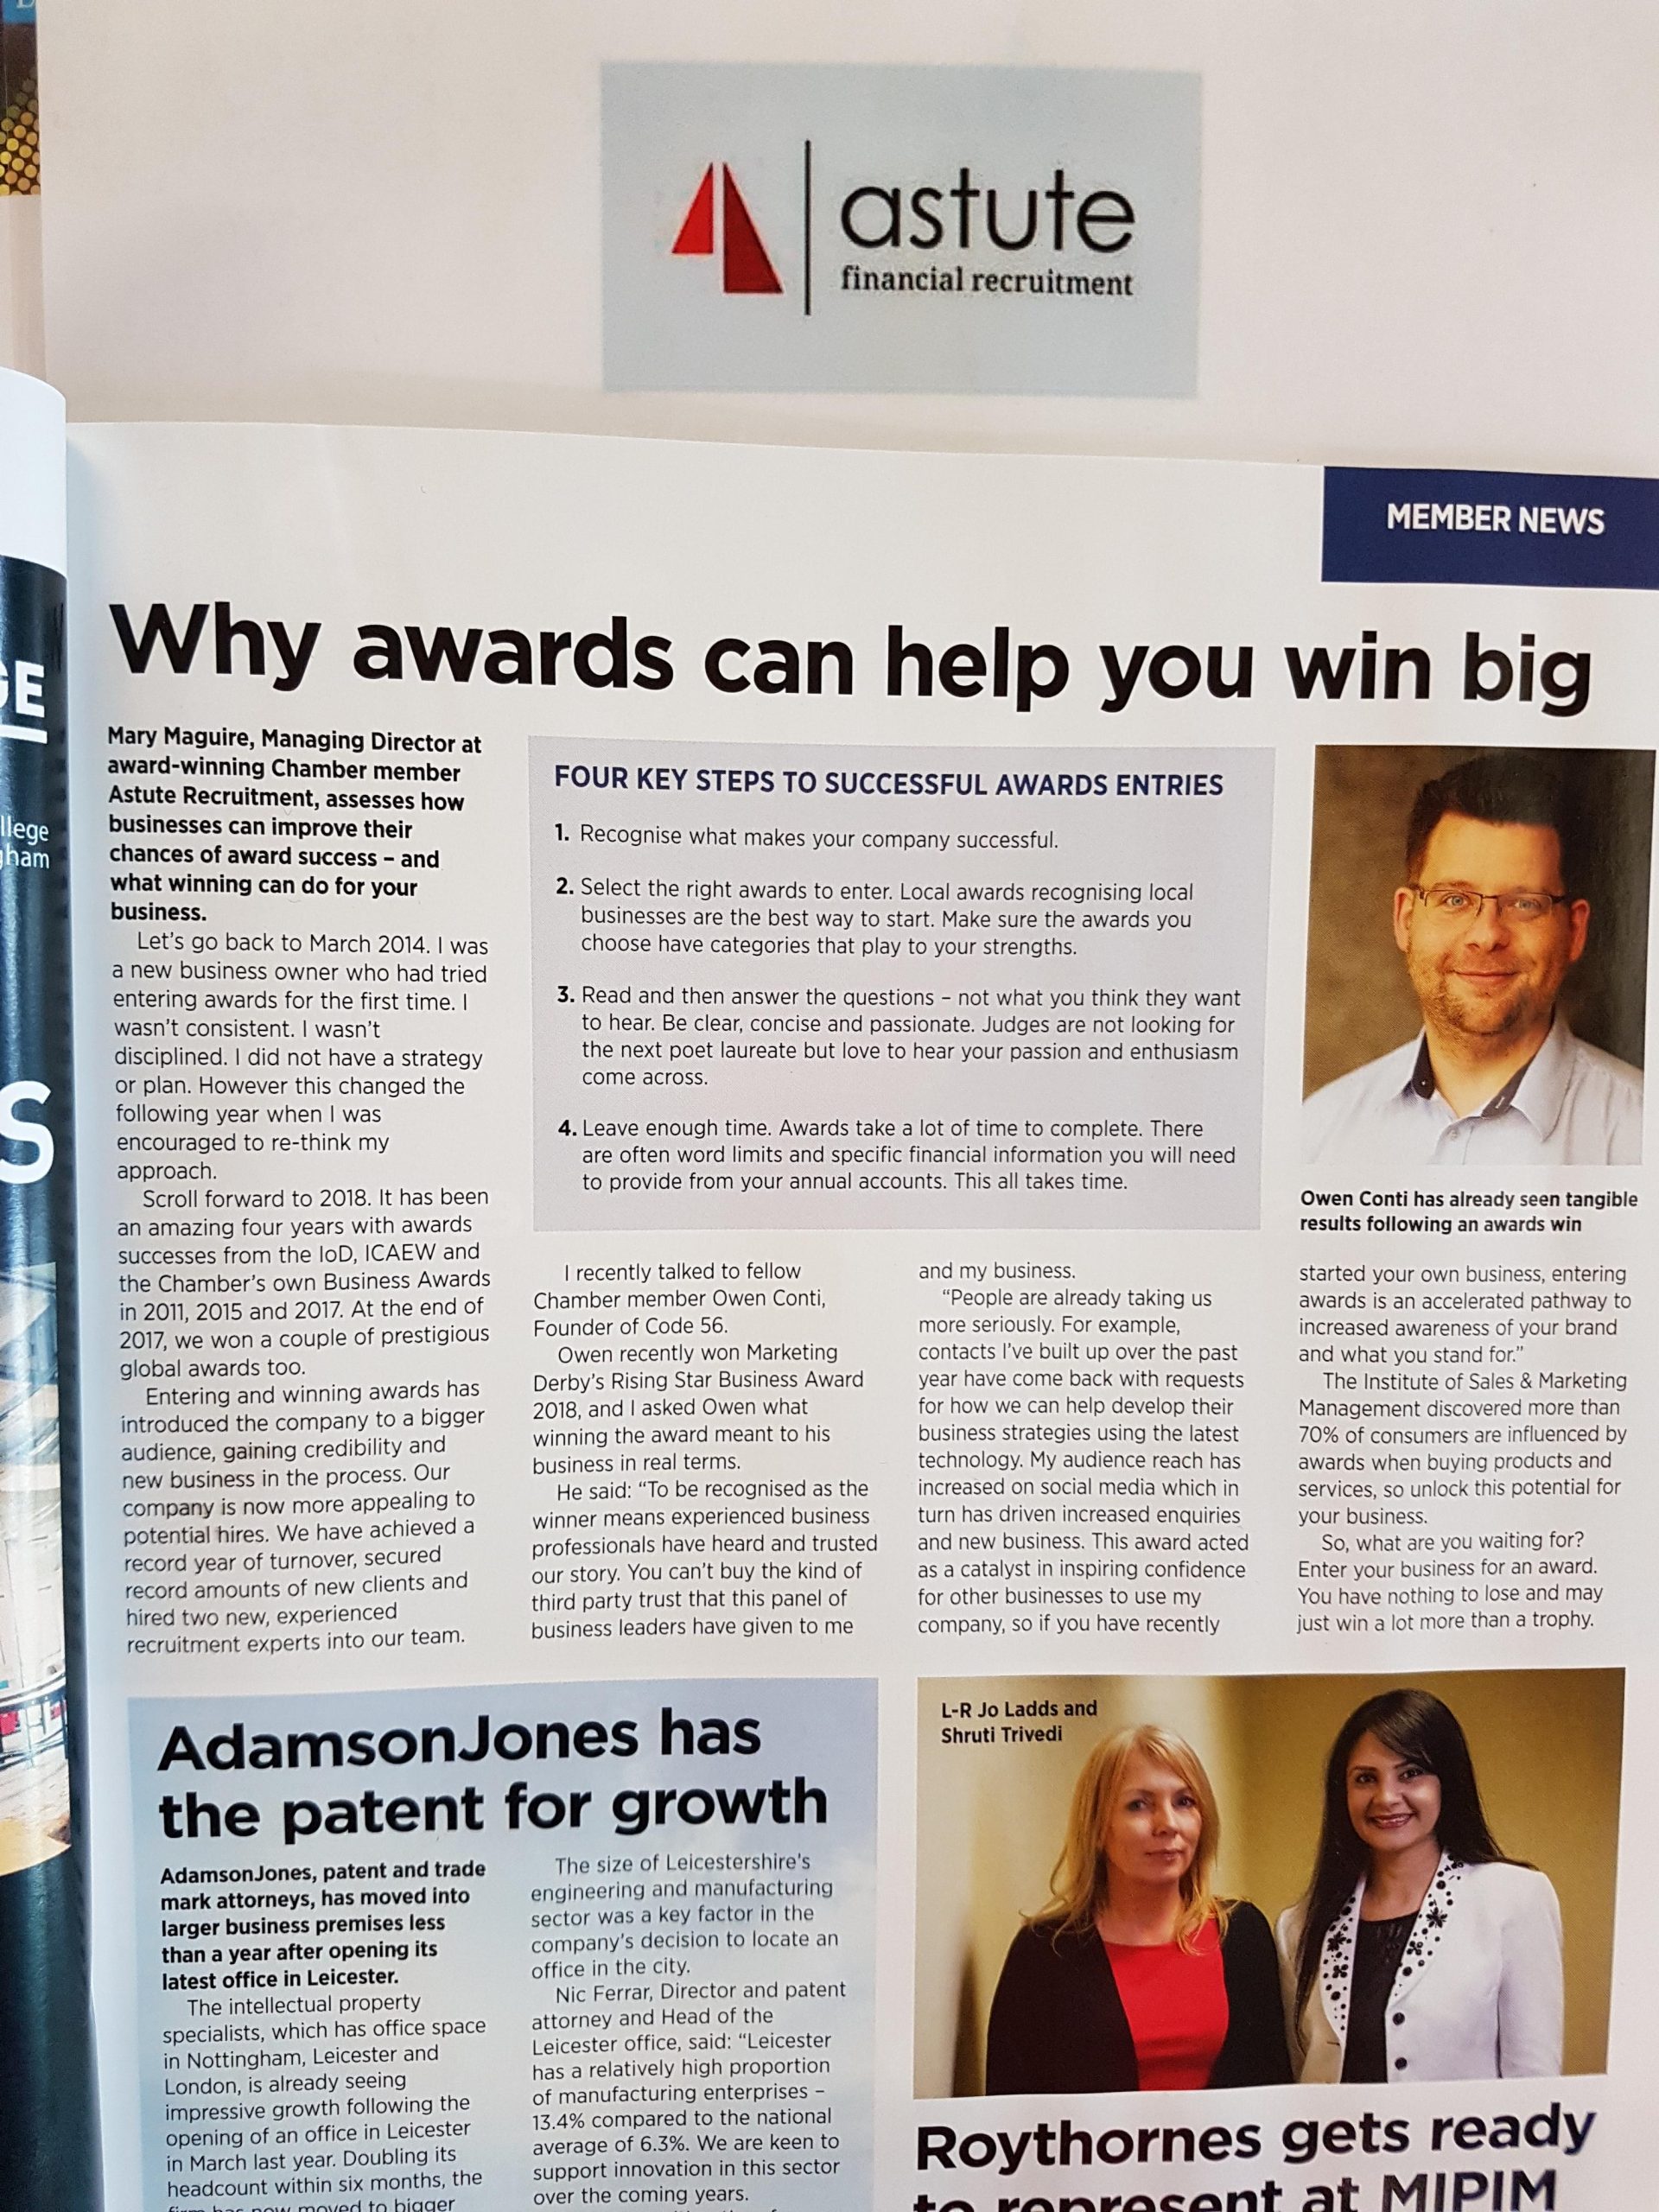 Why Awards Can Make You Win Big Press Article Written By Mary Maguire MD Astute Recruitment Ltd